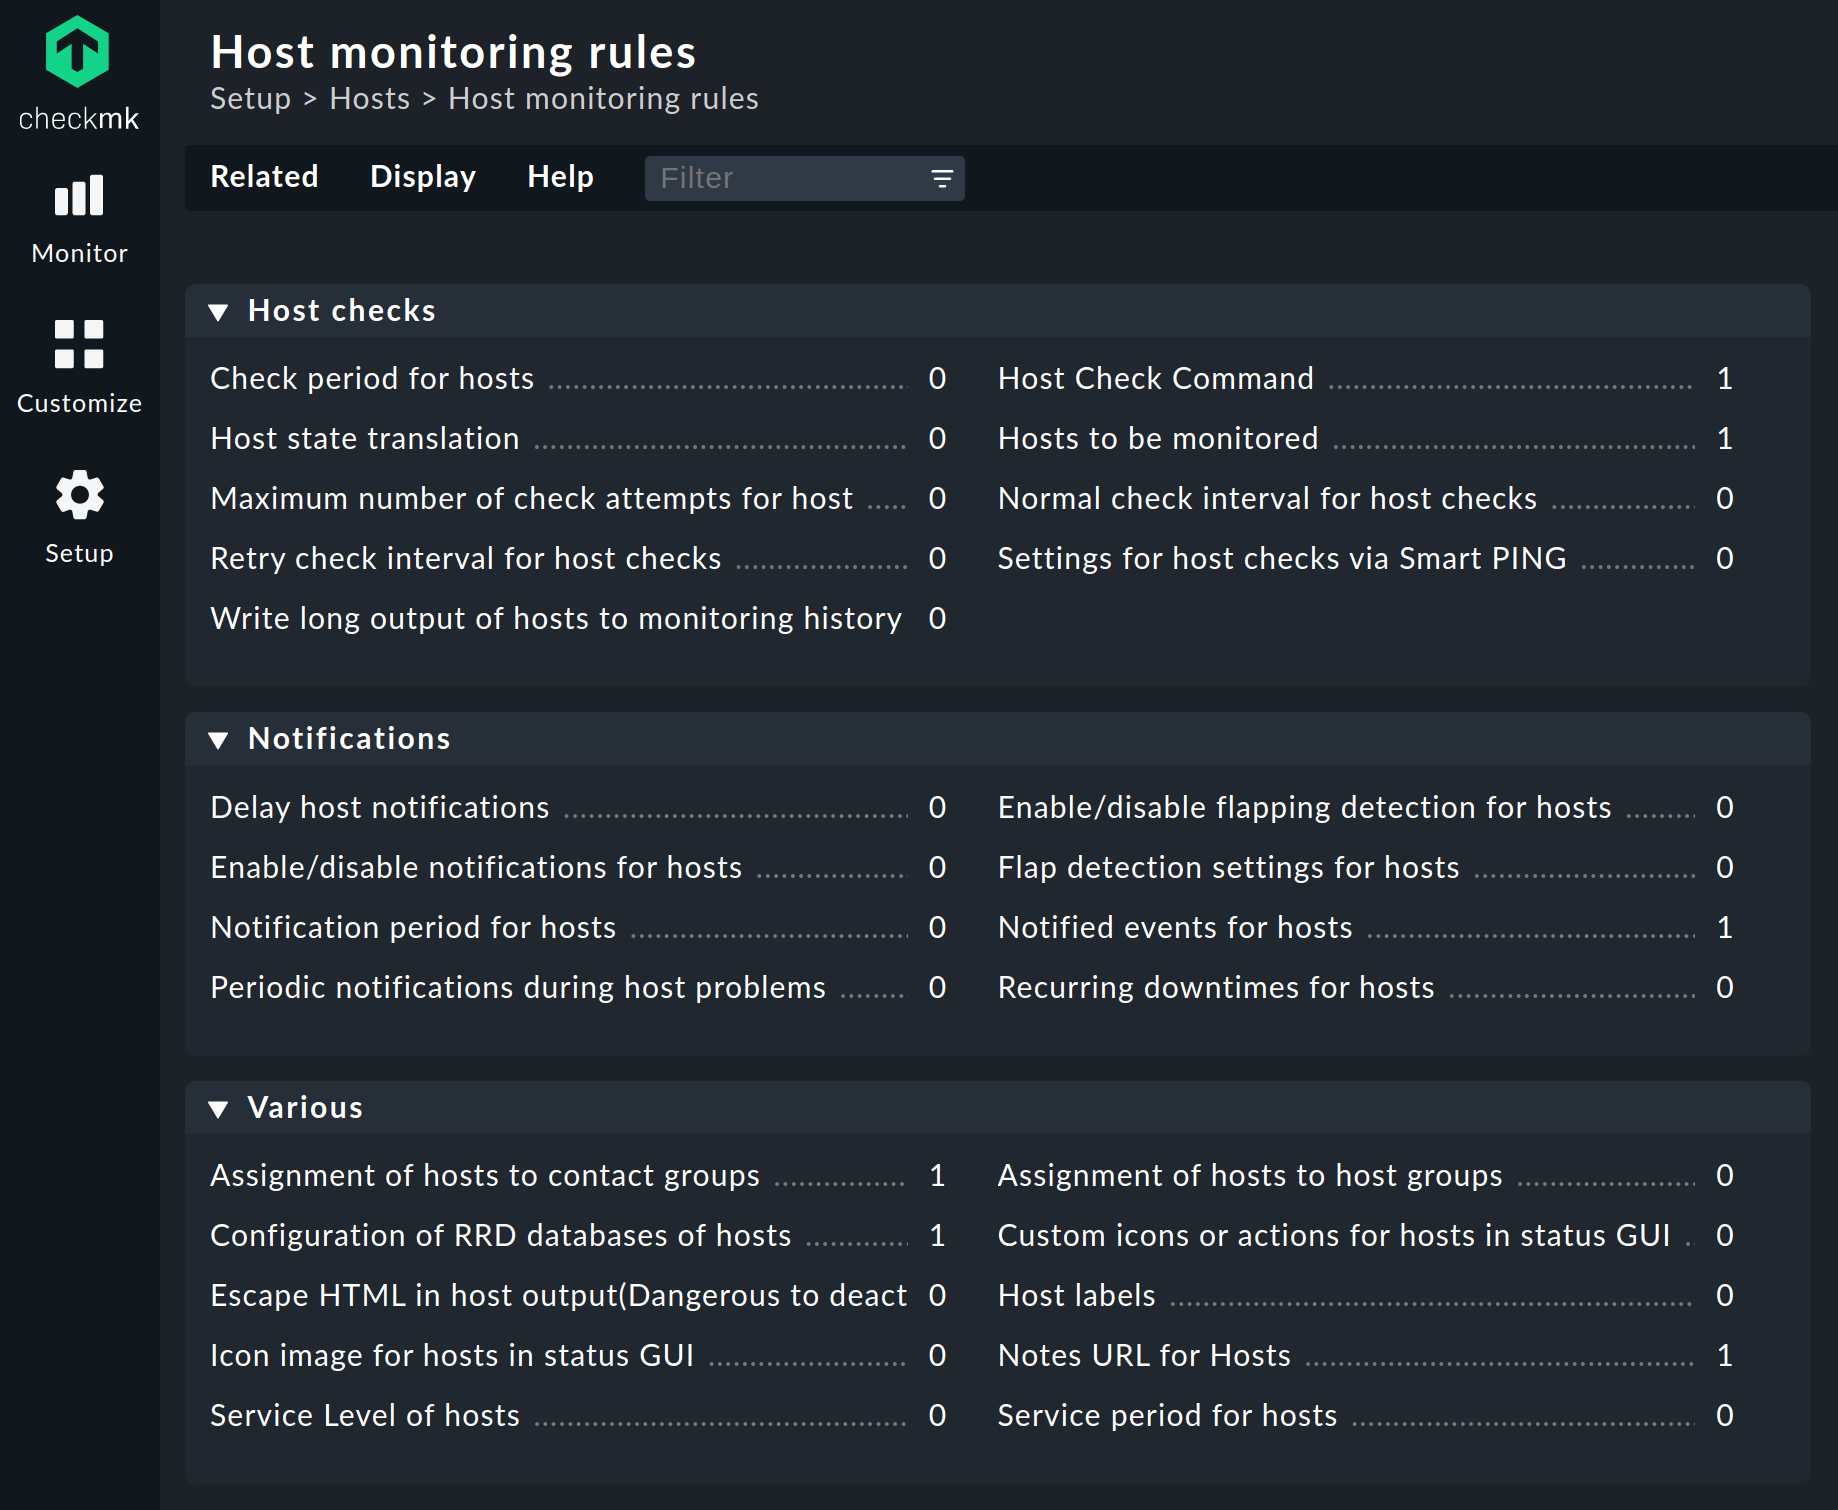 The 'Host monitoring rules' in the Setup menu.